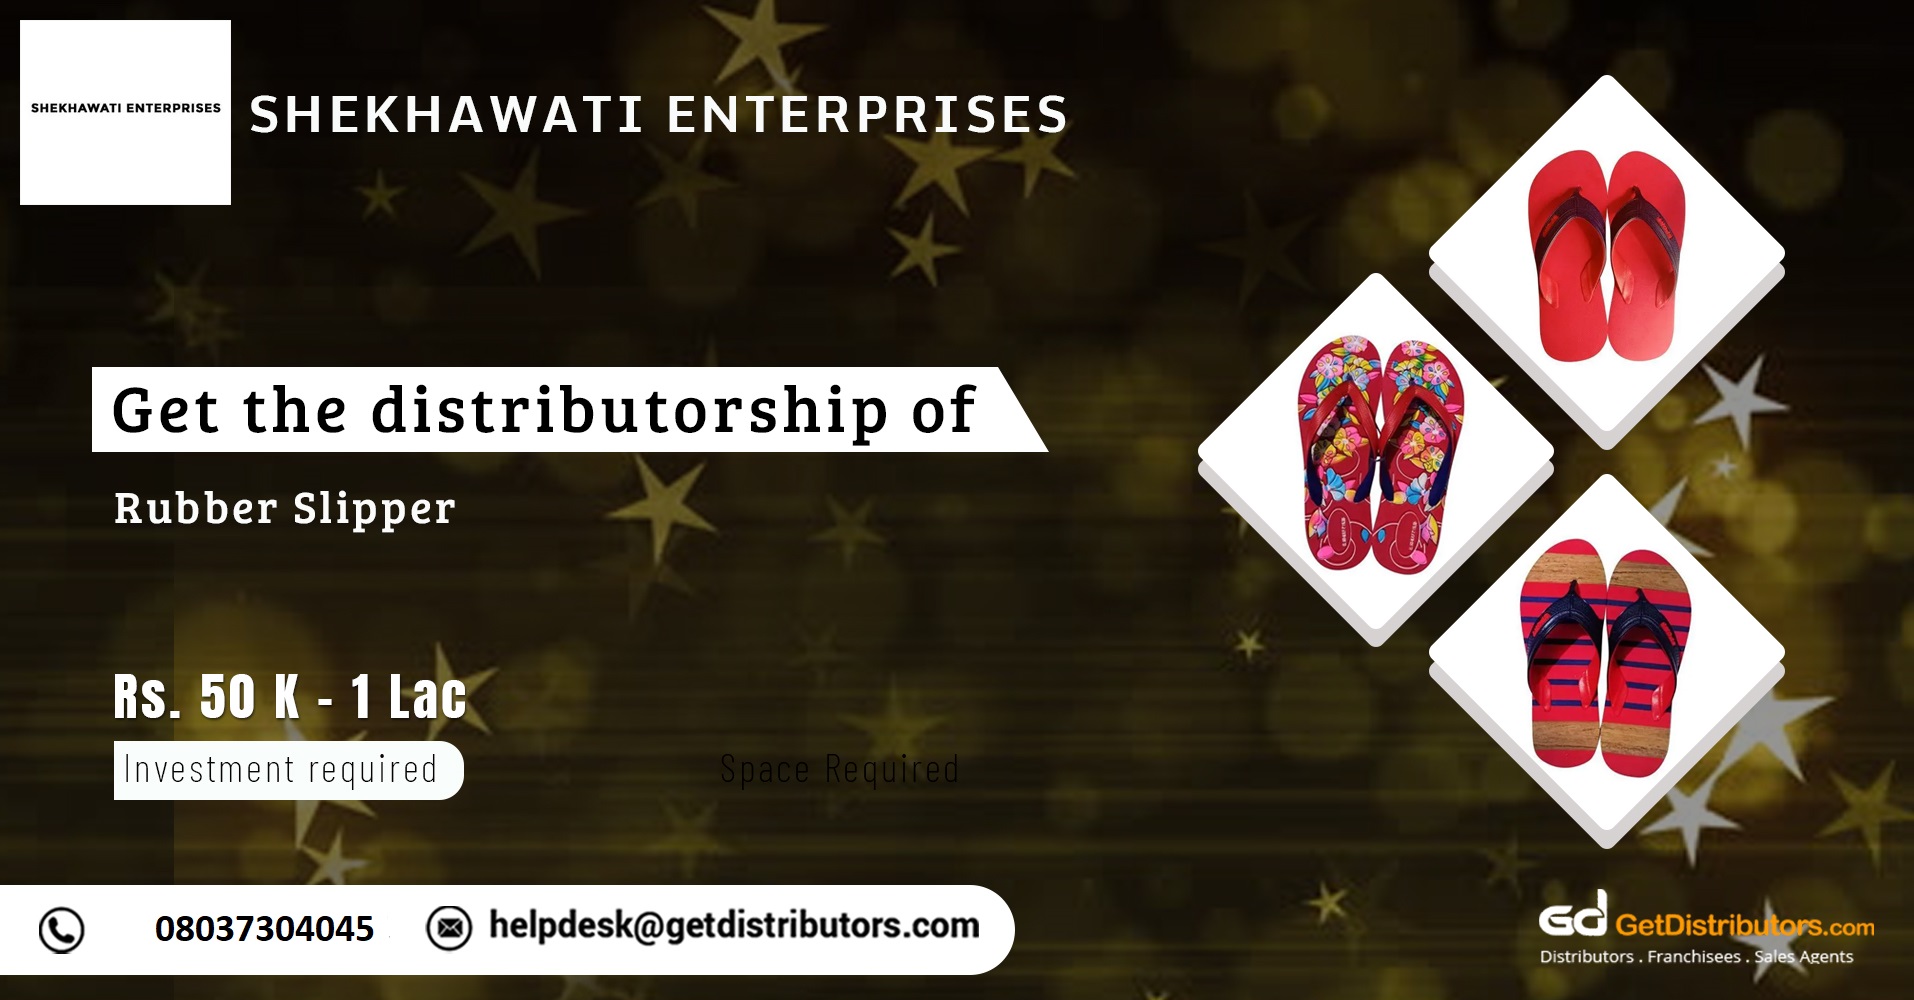 Best in class slippers for men, women, and kids at nominal rates